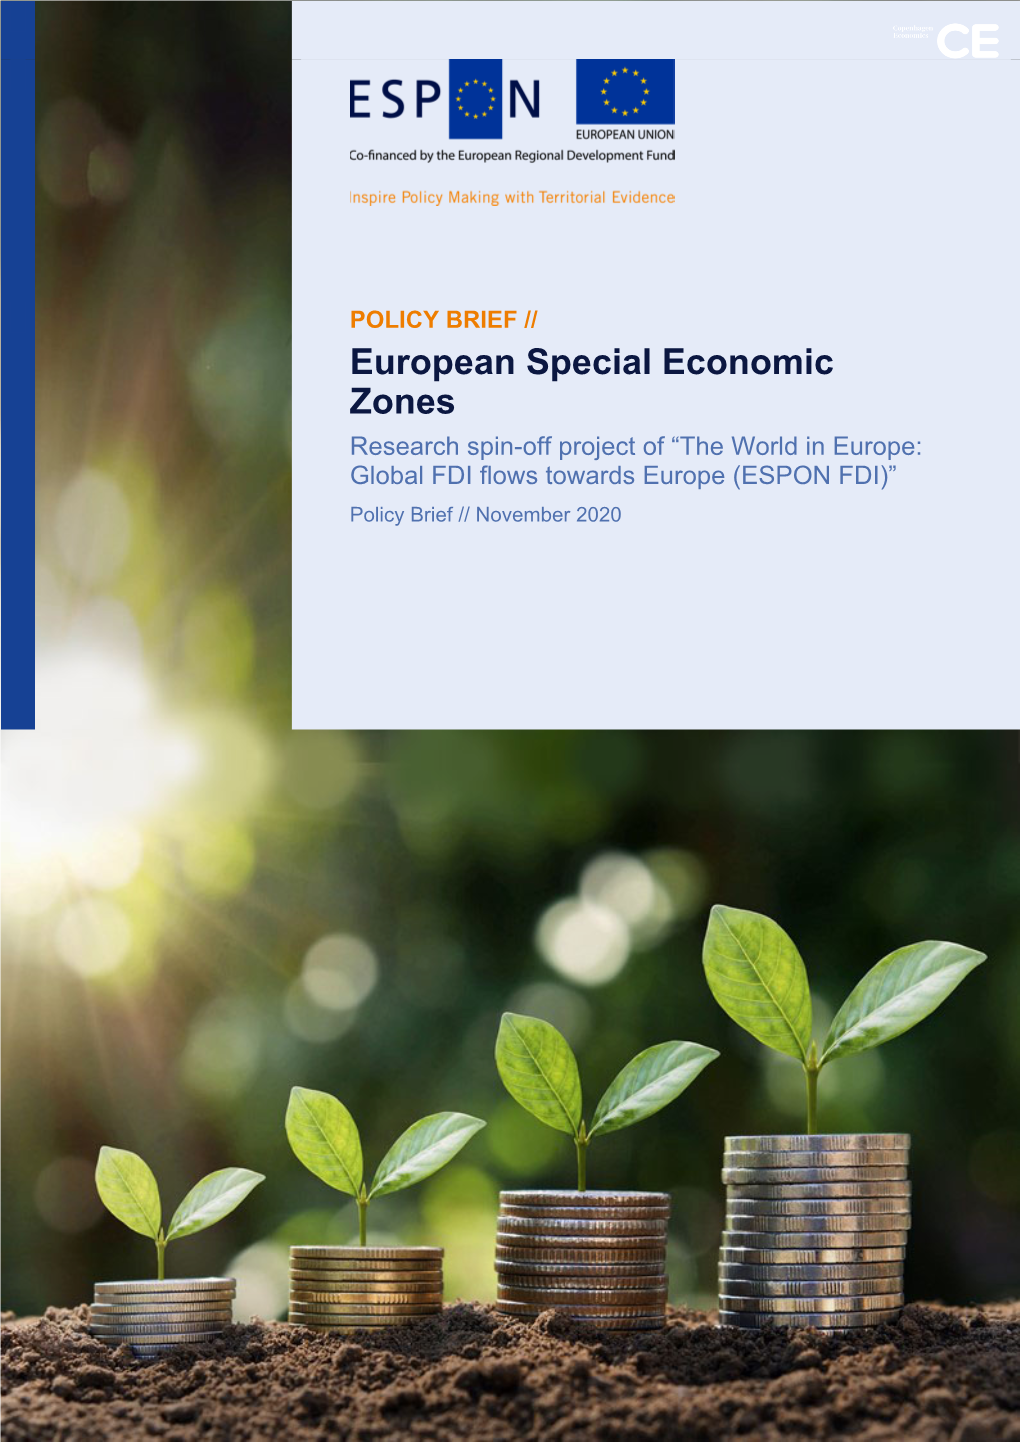 European Special Economic Zones Research Spin-Off Project of “The World in Europe: Global FDI Flows Towards Europe (ESPON FDI)” Policy Brief // November 2020